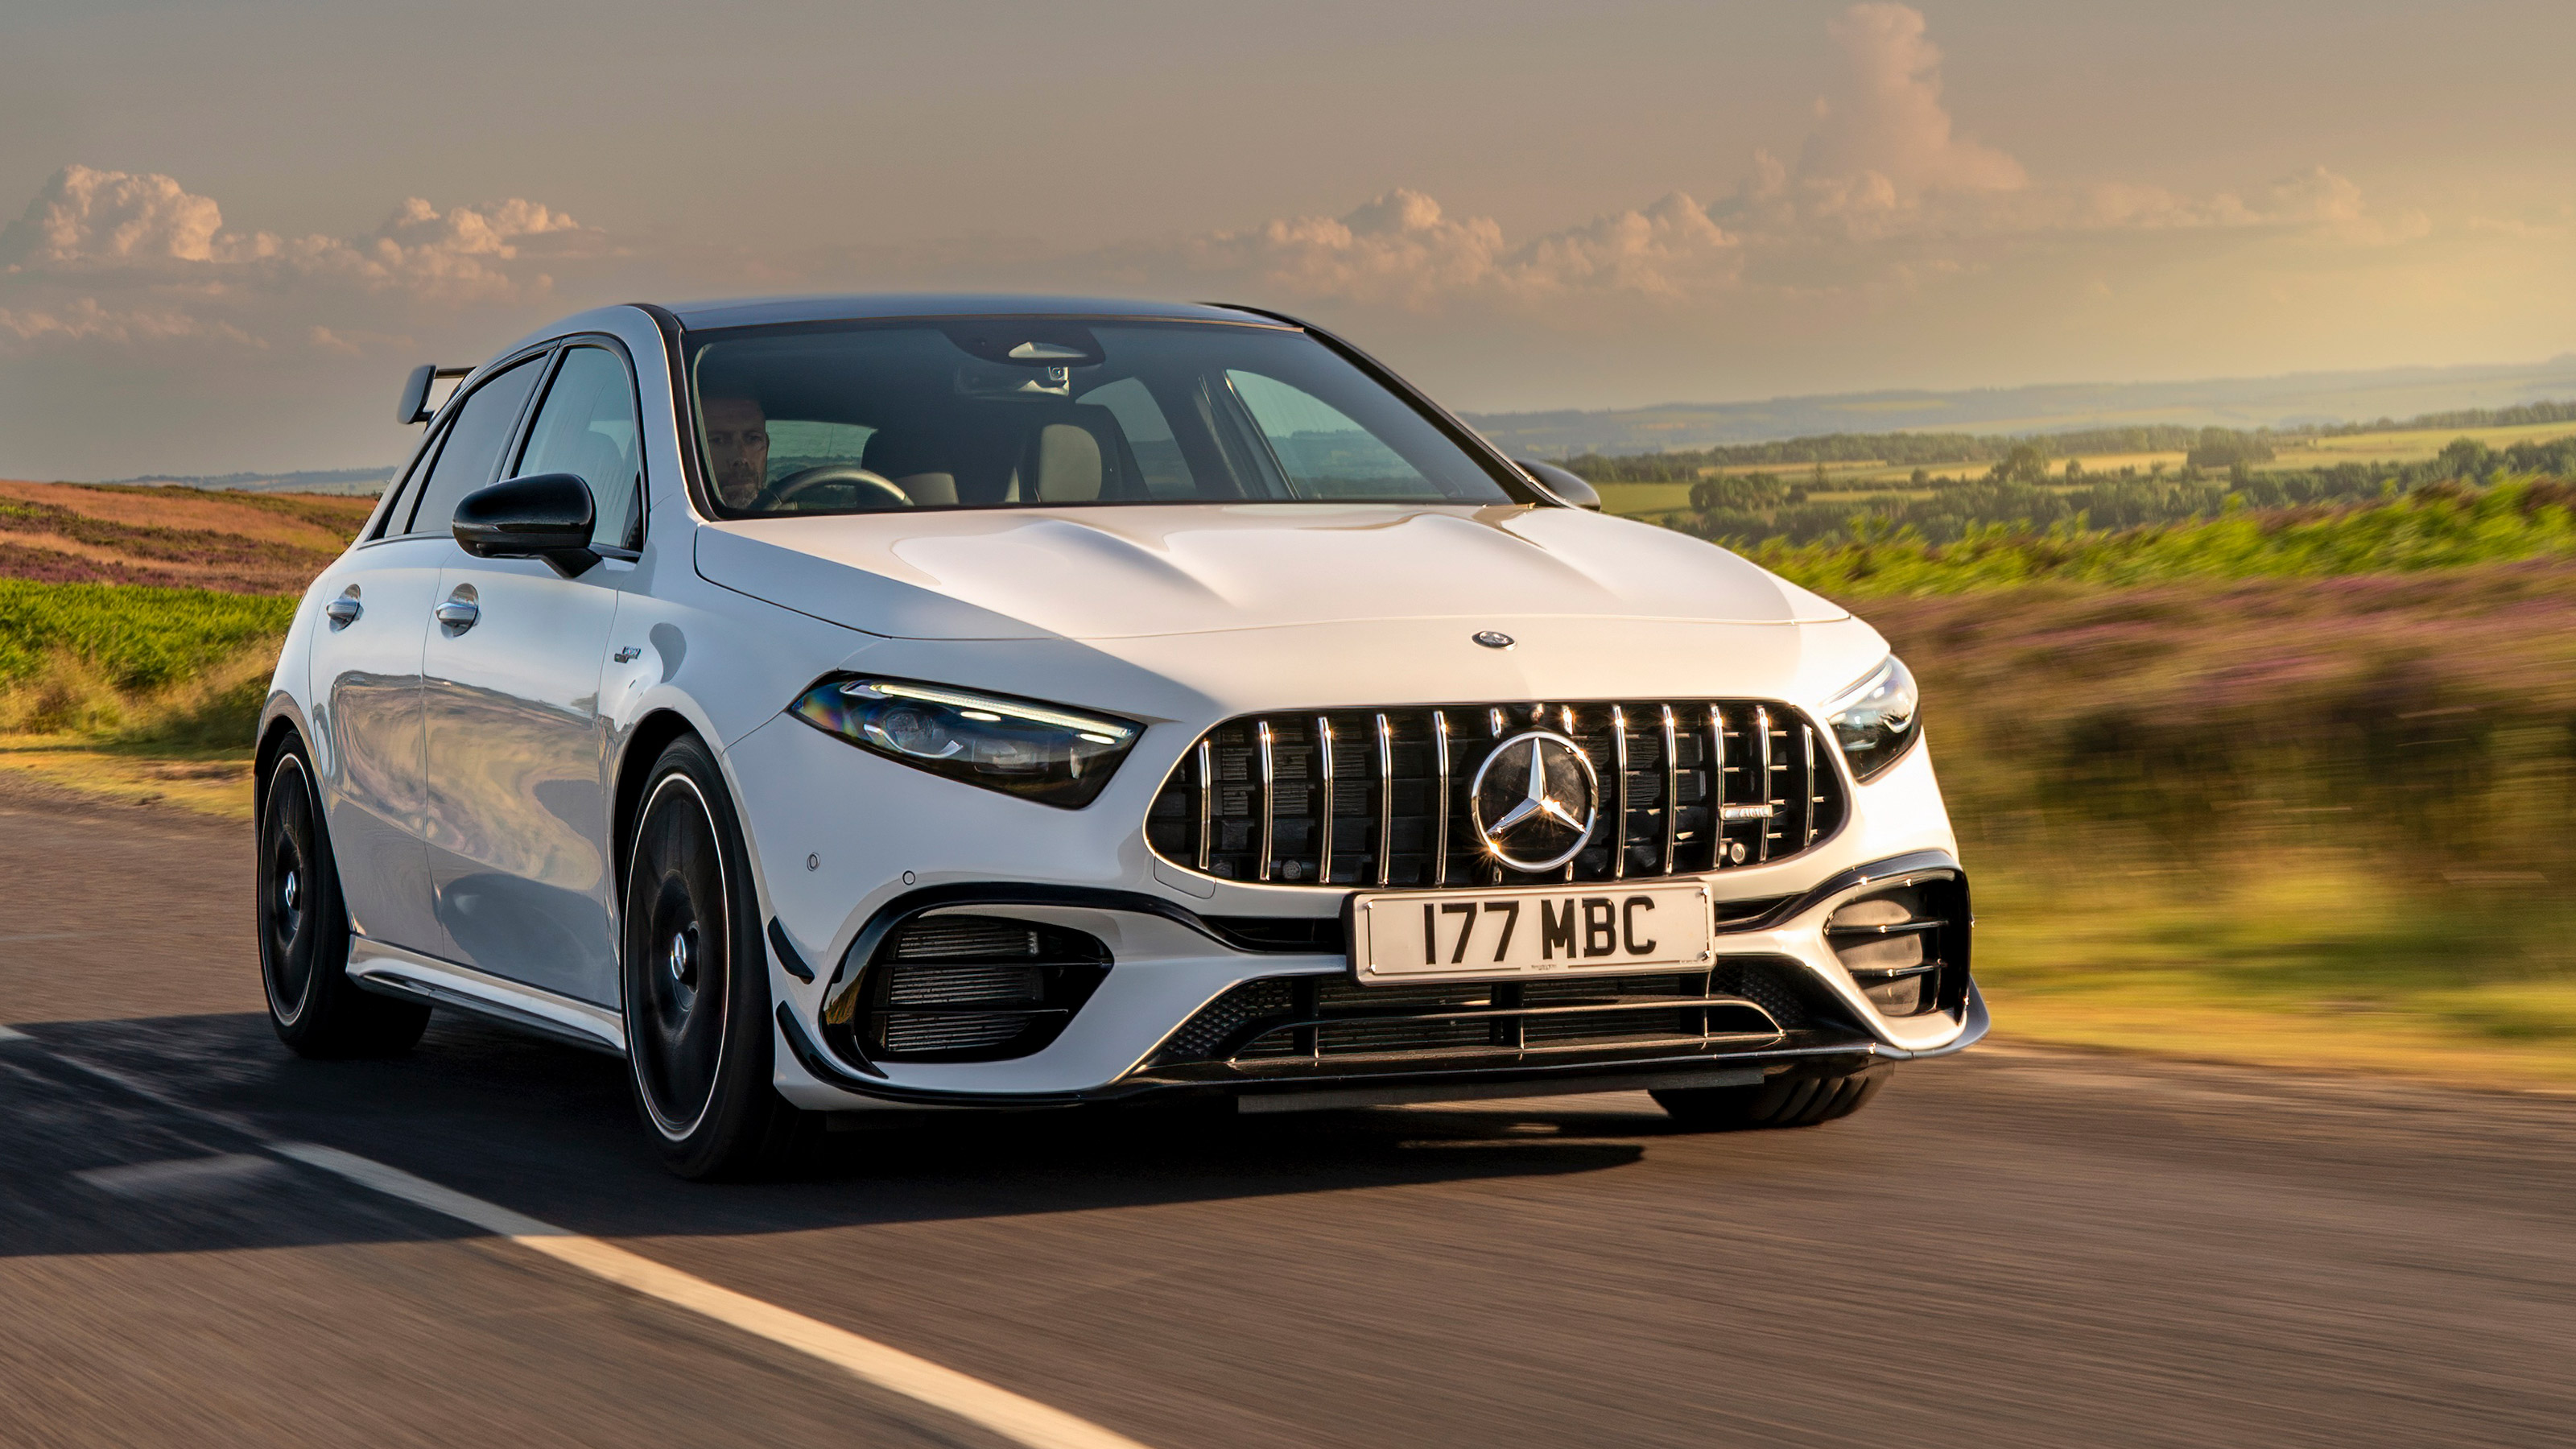 Mercedes-AMG A45 S review - vying with the Audi RS3 for class